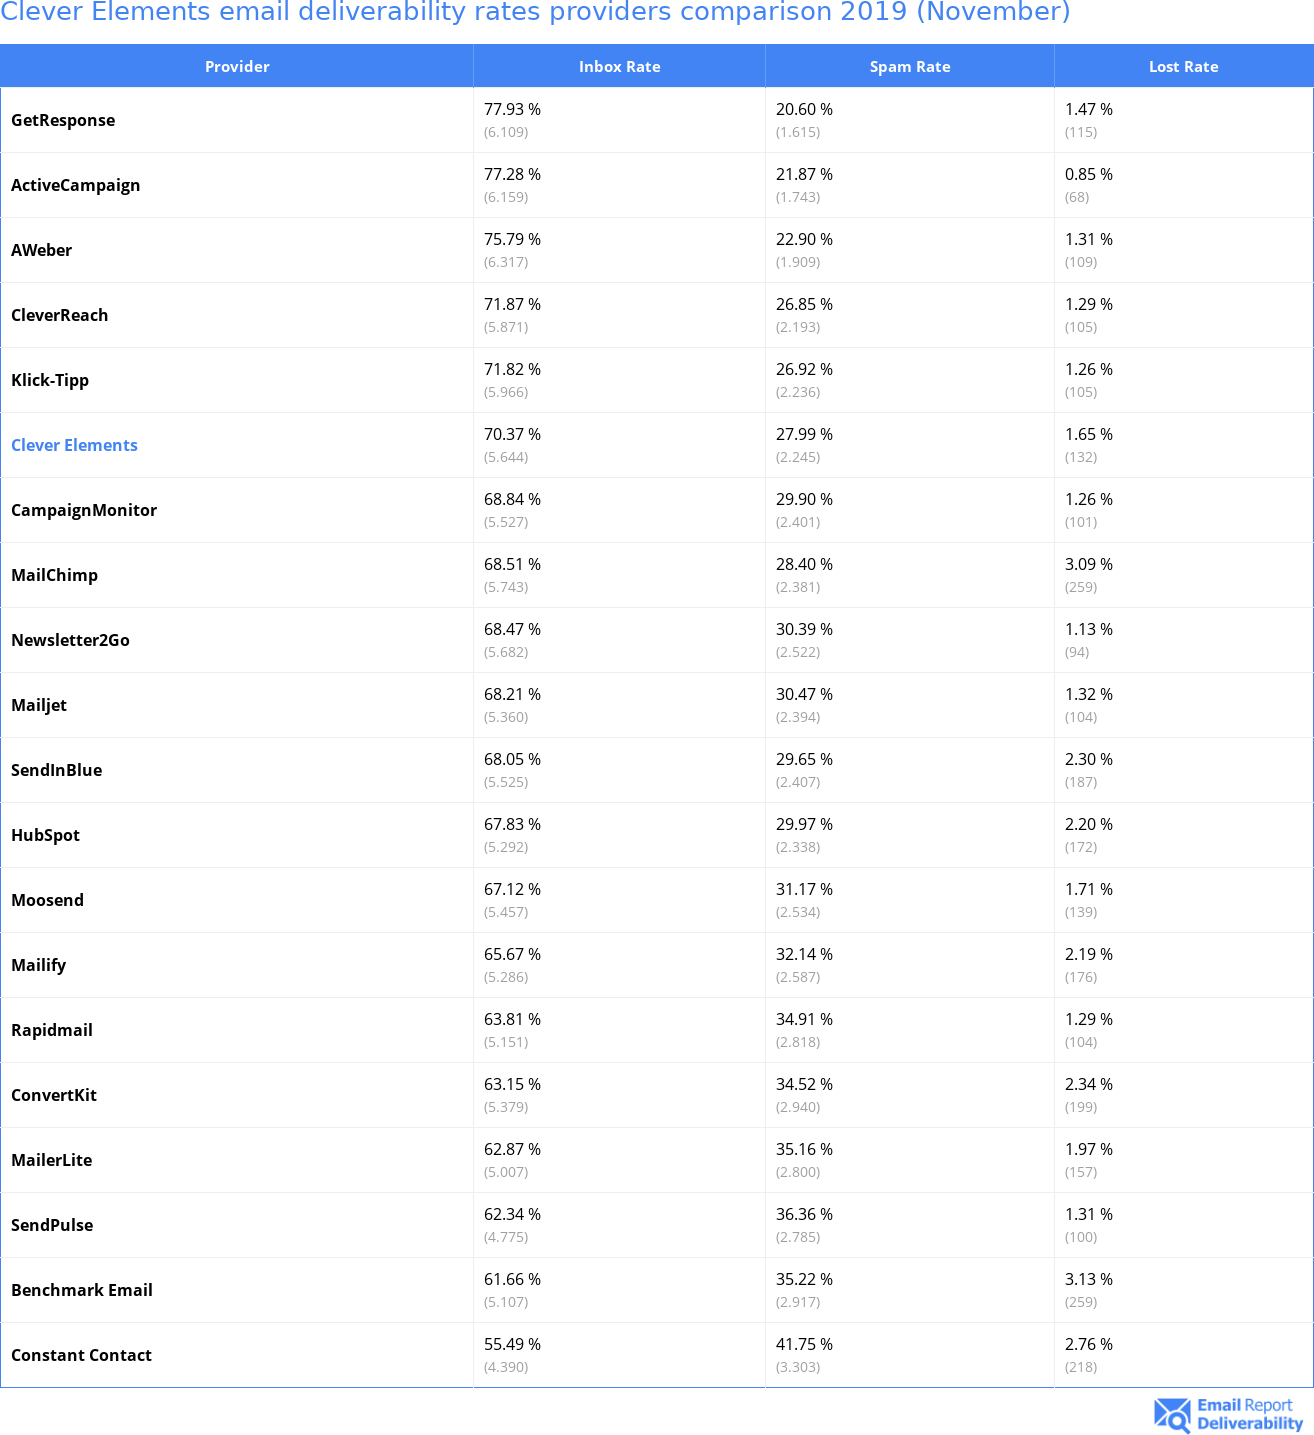 Clever Elements email deliverability rates providers comparison 2019 (November)